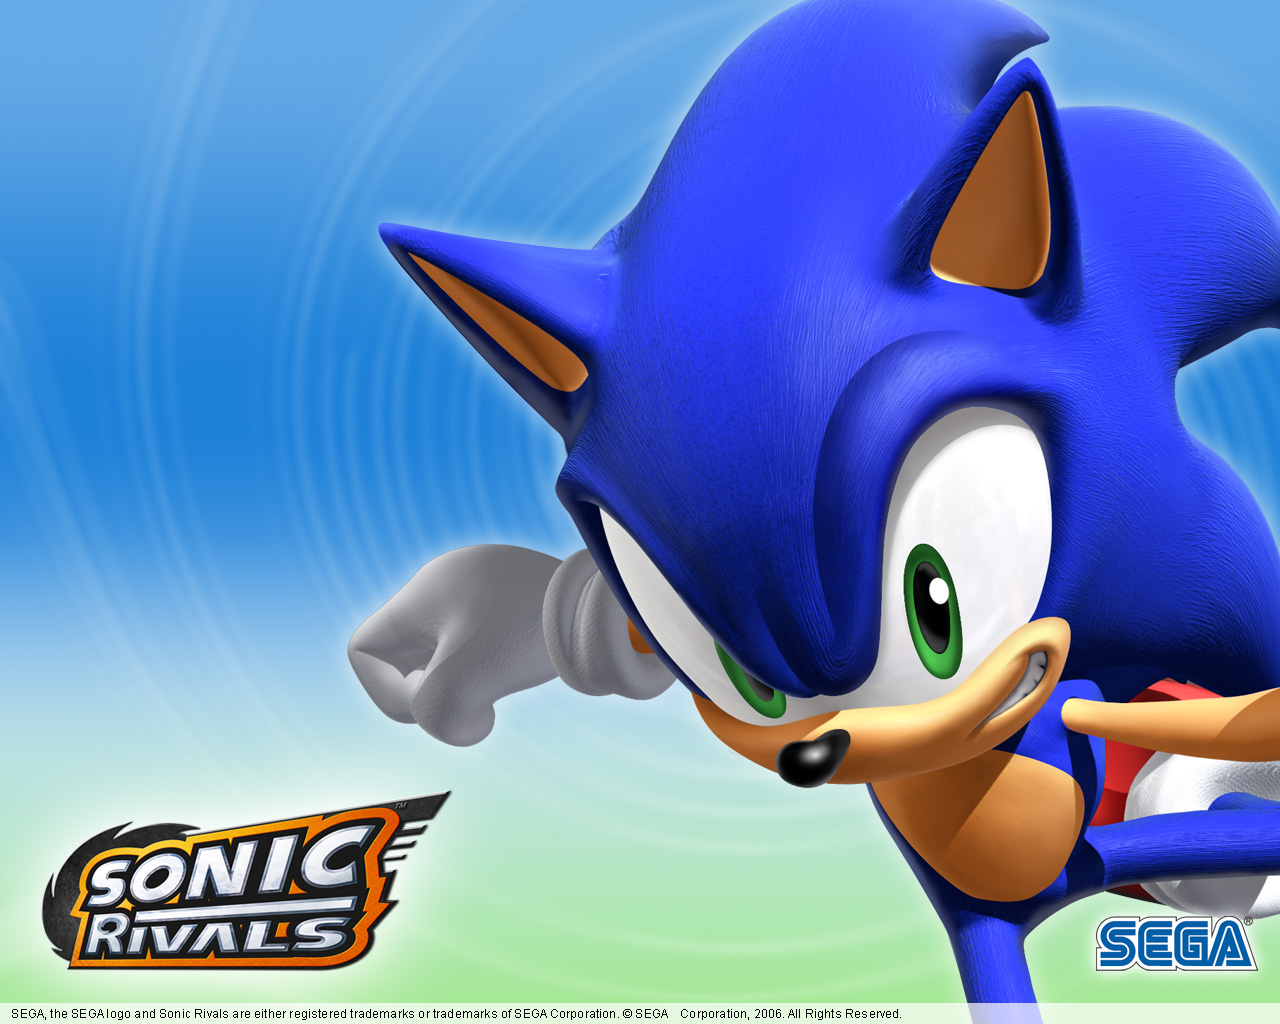 Wallpapers – Sonic Rivals | Last Minute Continue1280 x 1024